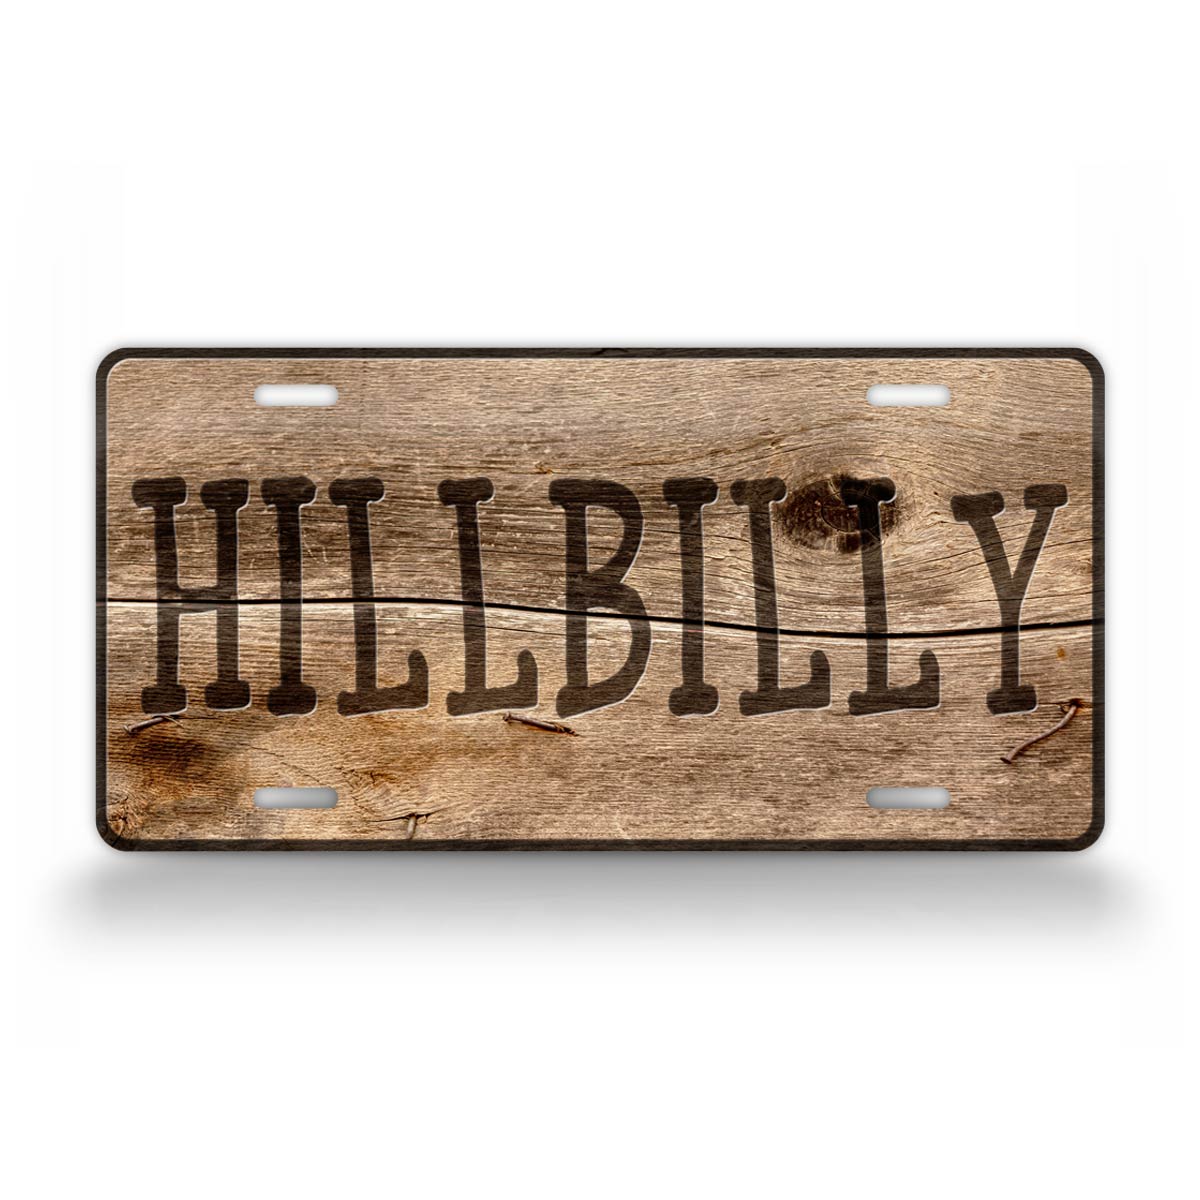 Rustic Style Wooden Hillbilly License Plate 